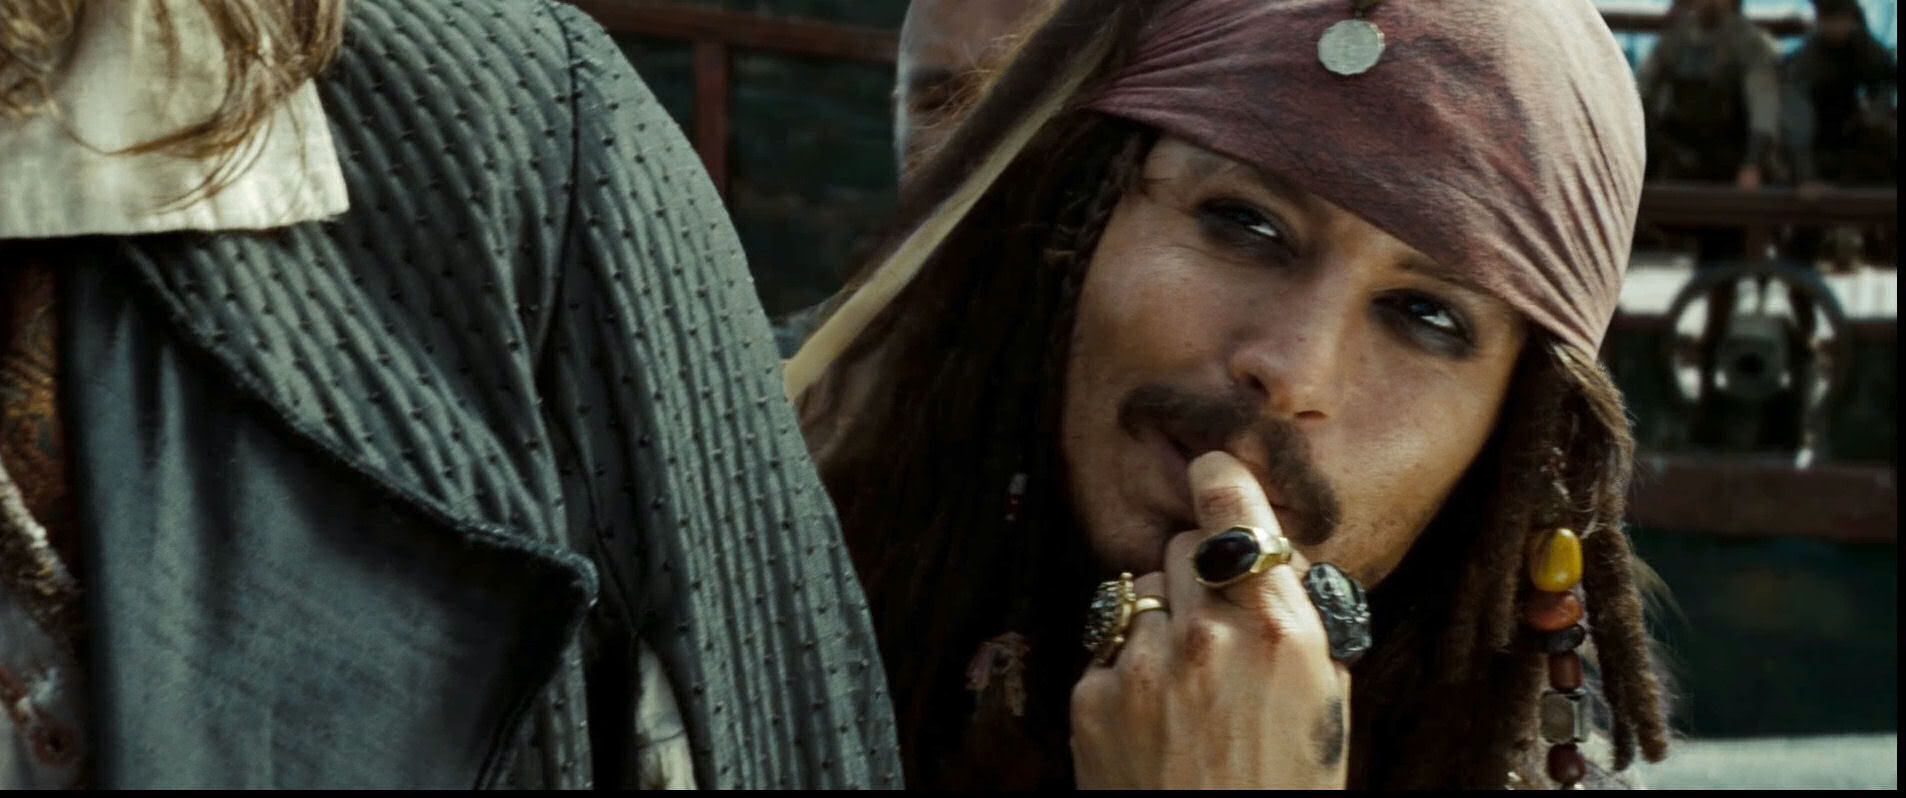 http://i4.photobucket.com/albums/y144/deepintodepp/Pirates%20At%20Worlds%20End/ScreenCaps%20from%20Clips/000002304.jpg